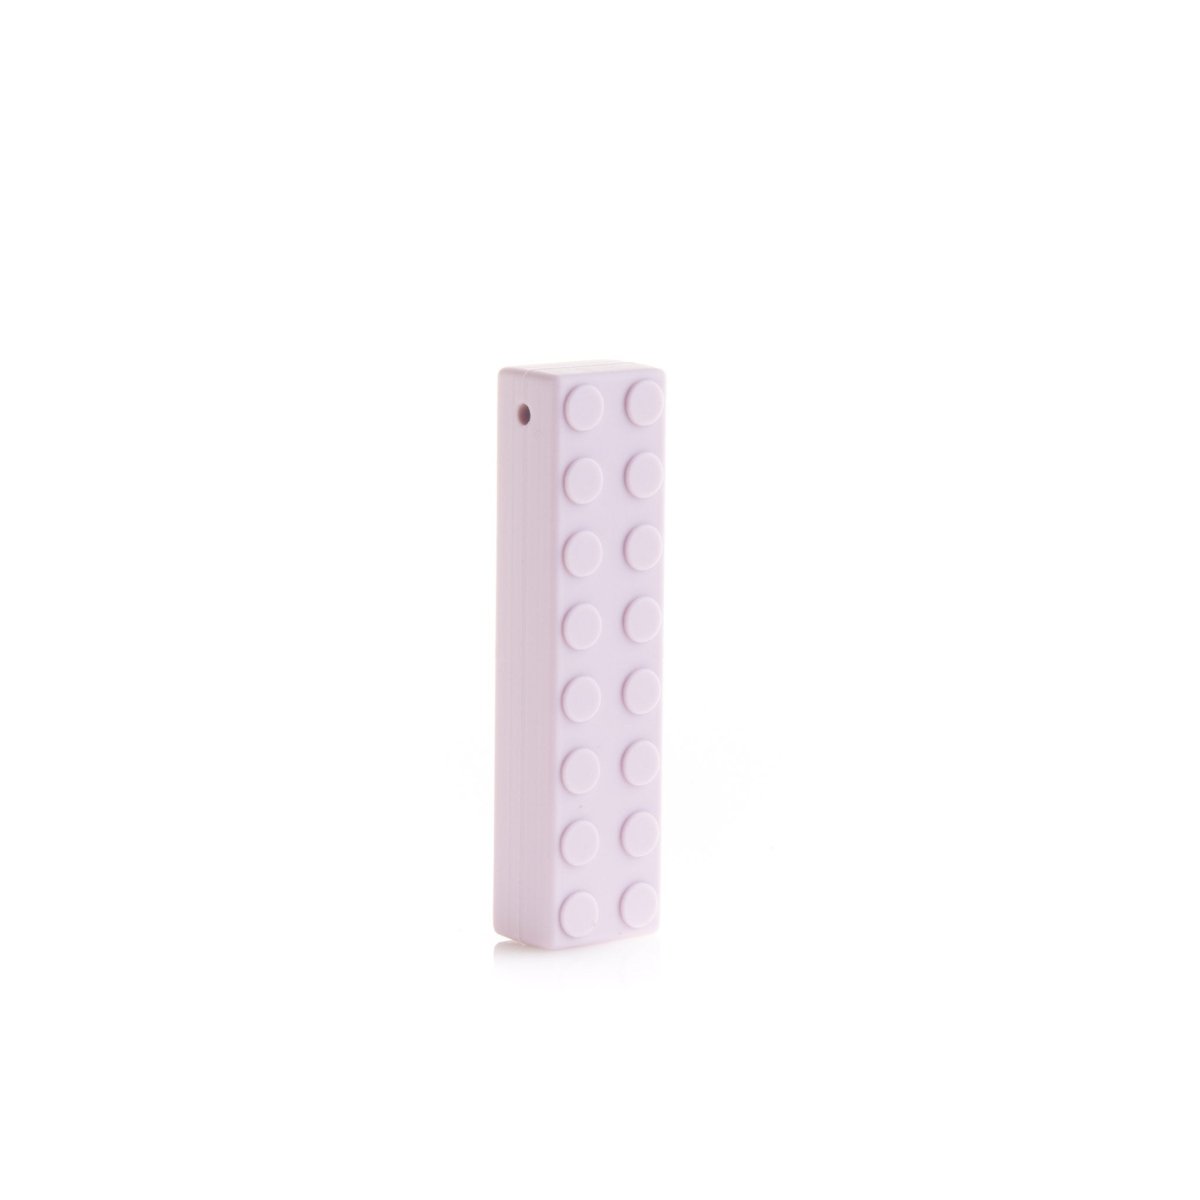 Silicone Teethers and Pendants Blocks Lilac from Cara & Co Craft Supply